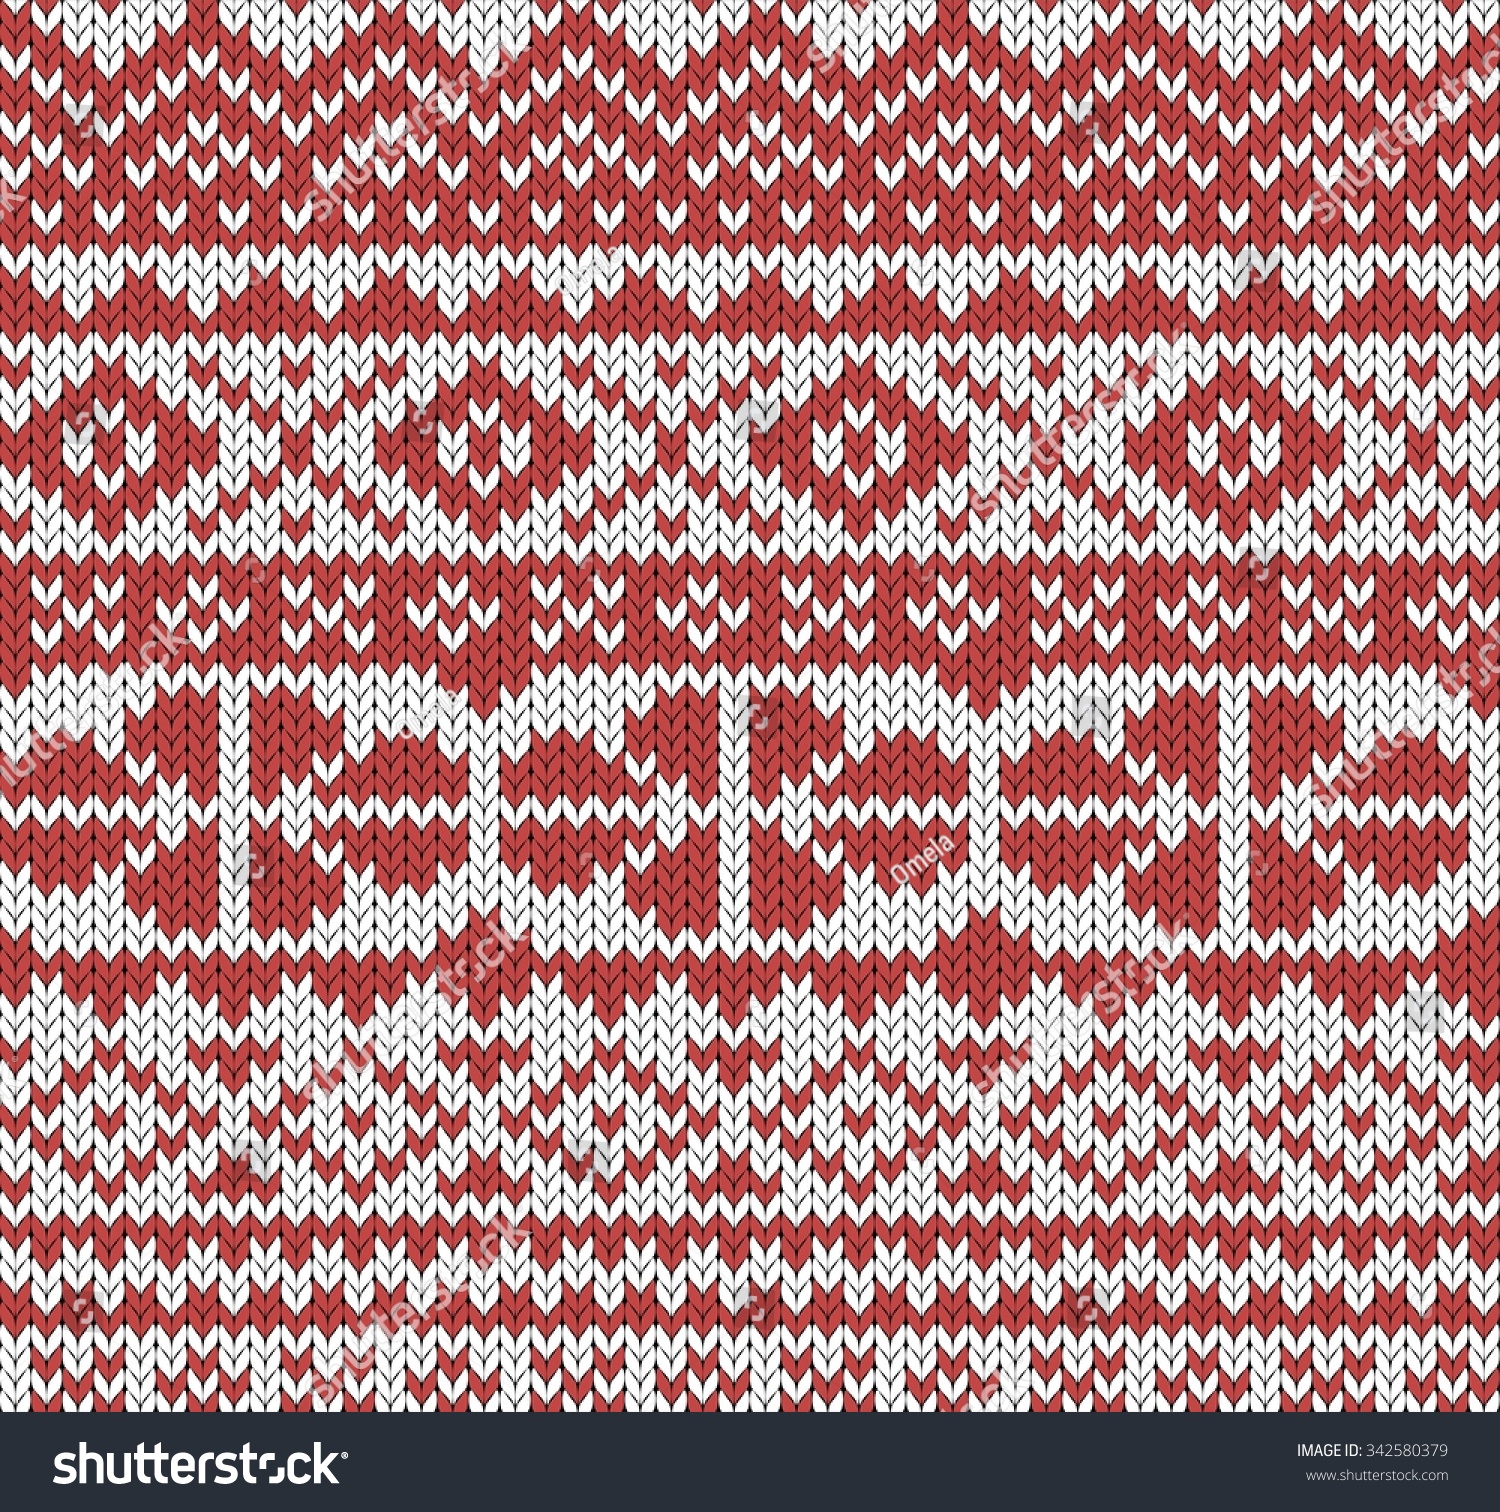 Knitted Seamless Yarn Swatch Stylized Nordic Stock Vector (Royalty Free ...